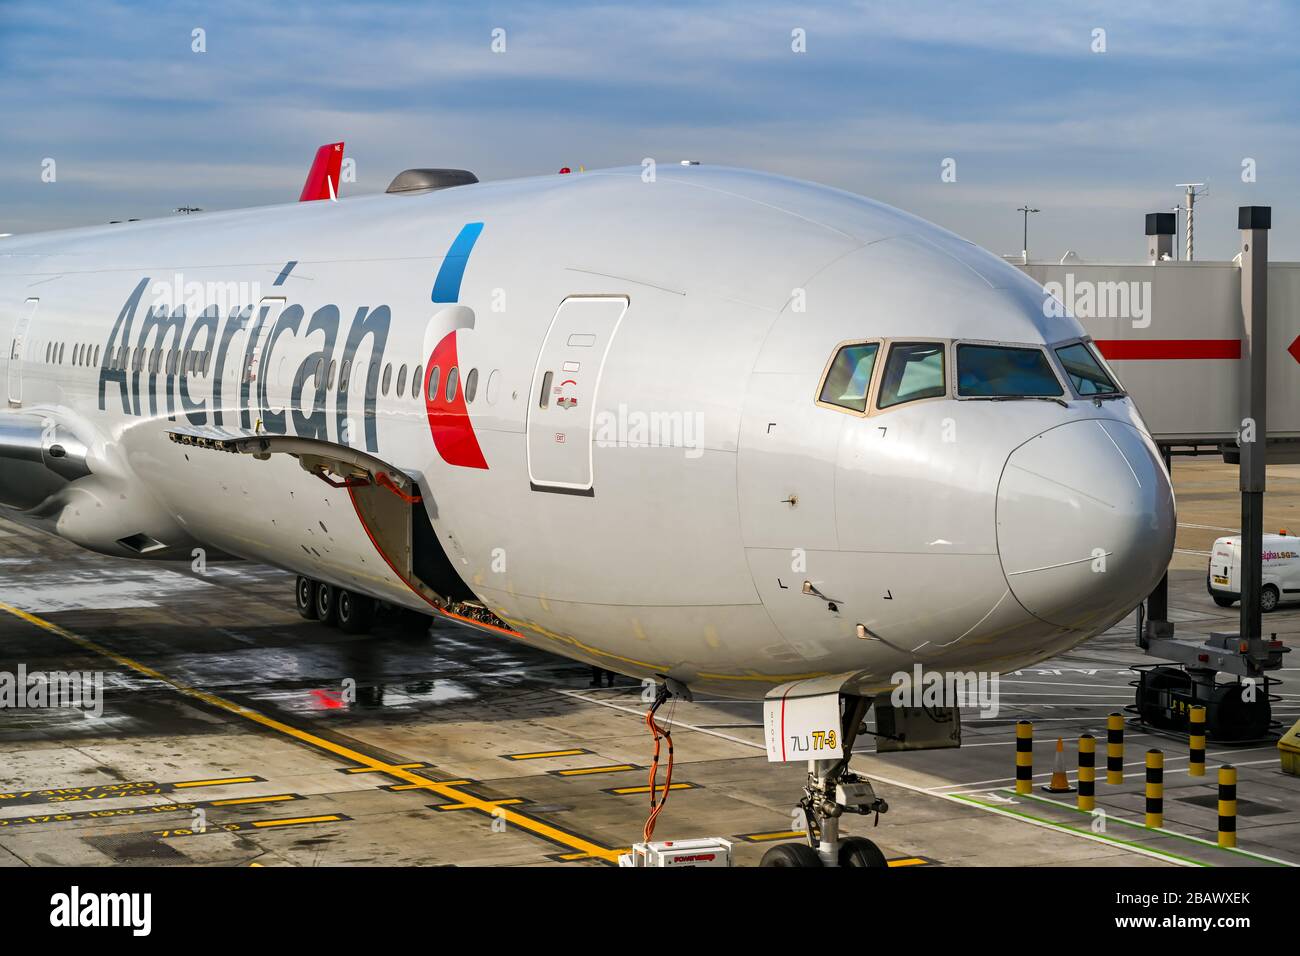 LONDON, ENGLAND - NOVEMBER 2018: American Airlines Boeing 777 long haul airliner parked at Terminal 3 at London Heathrow Airport. Stock Photo